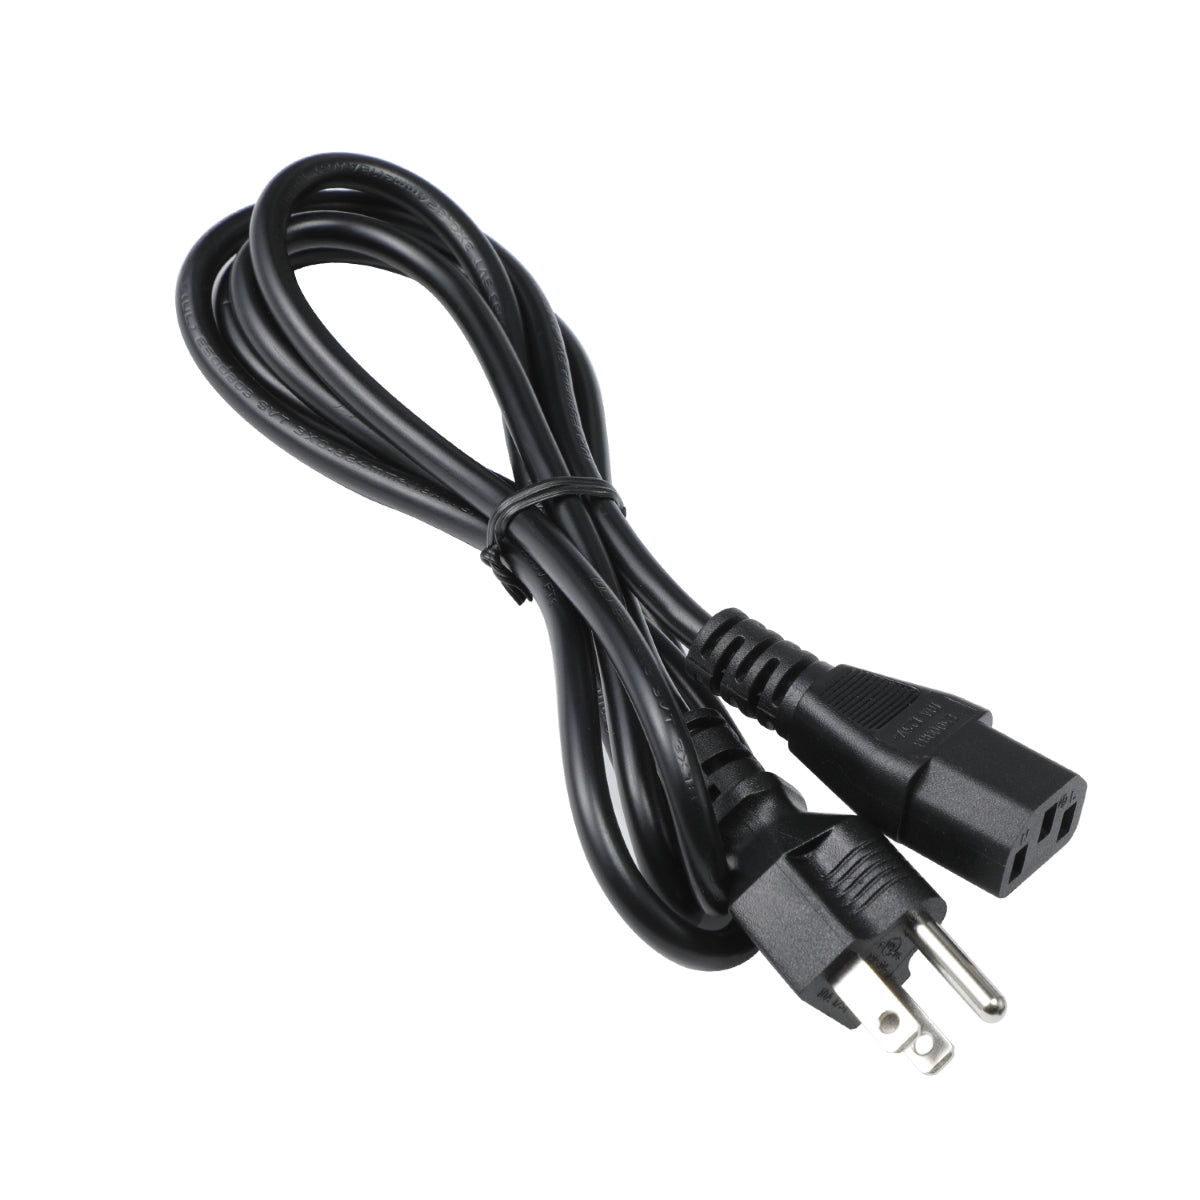 Power Cord for LG 27UD58-B Monitor TV.